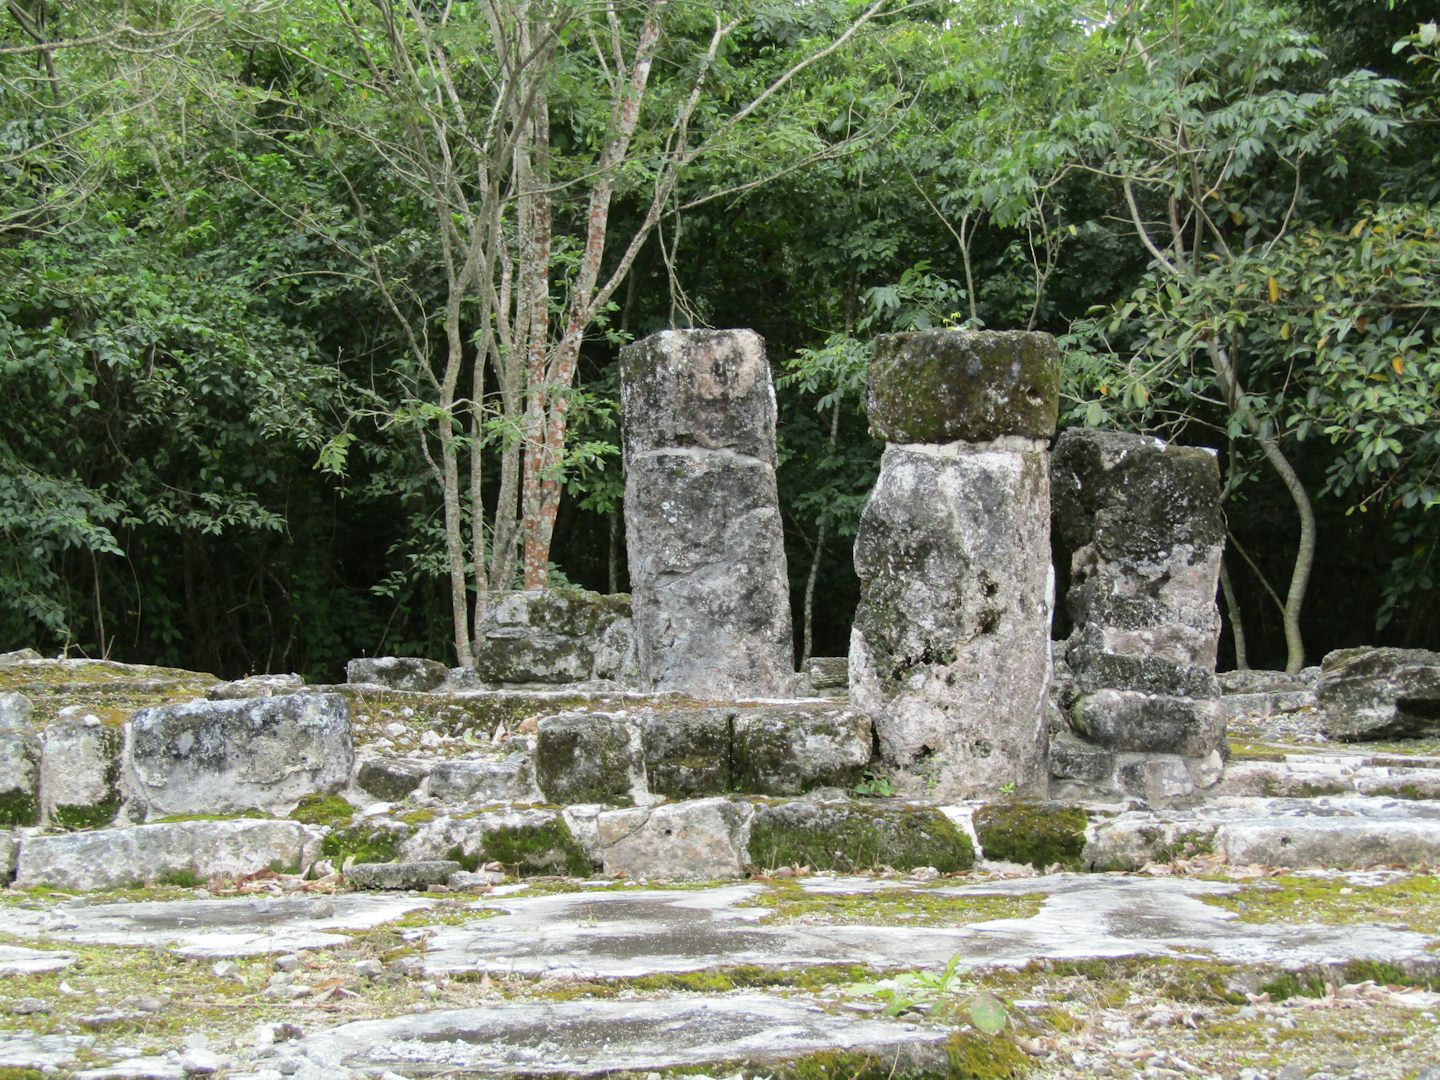 A picture of the Ruins we visited in Cozumel.  We went to the ruins of San Gervasio